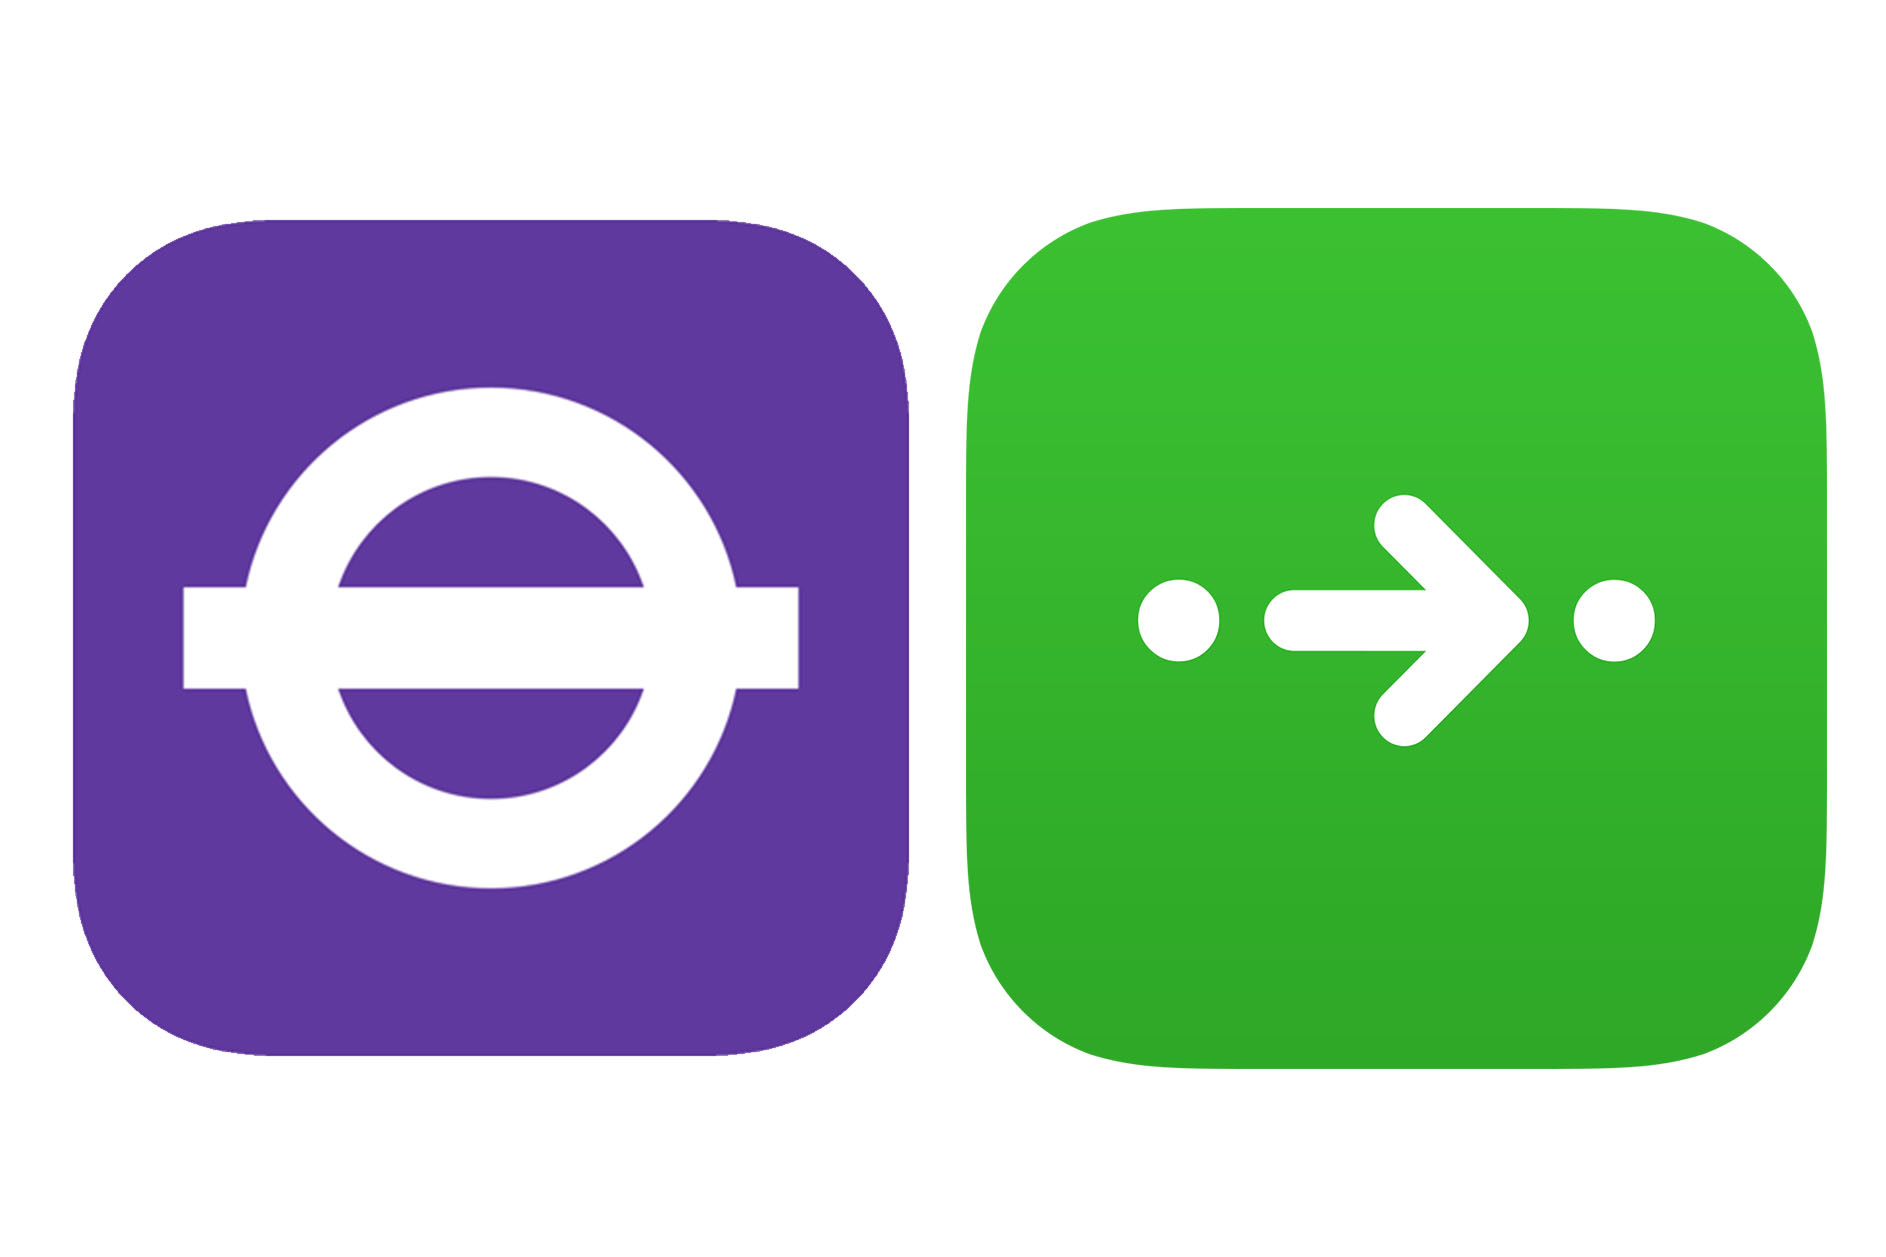 tfl go and citymapper apps for london, travel tips for london first timers